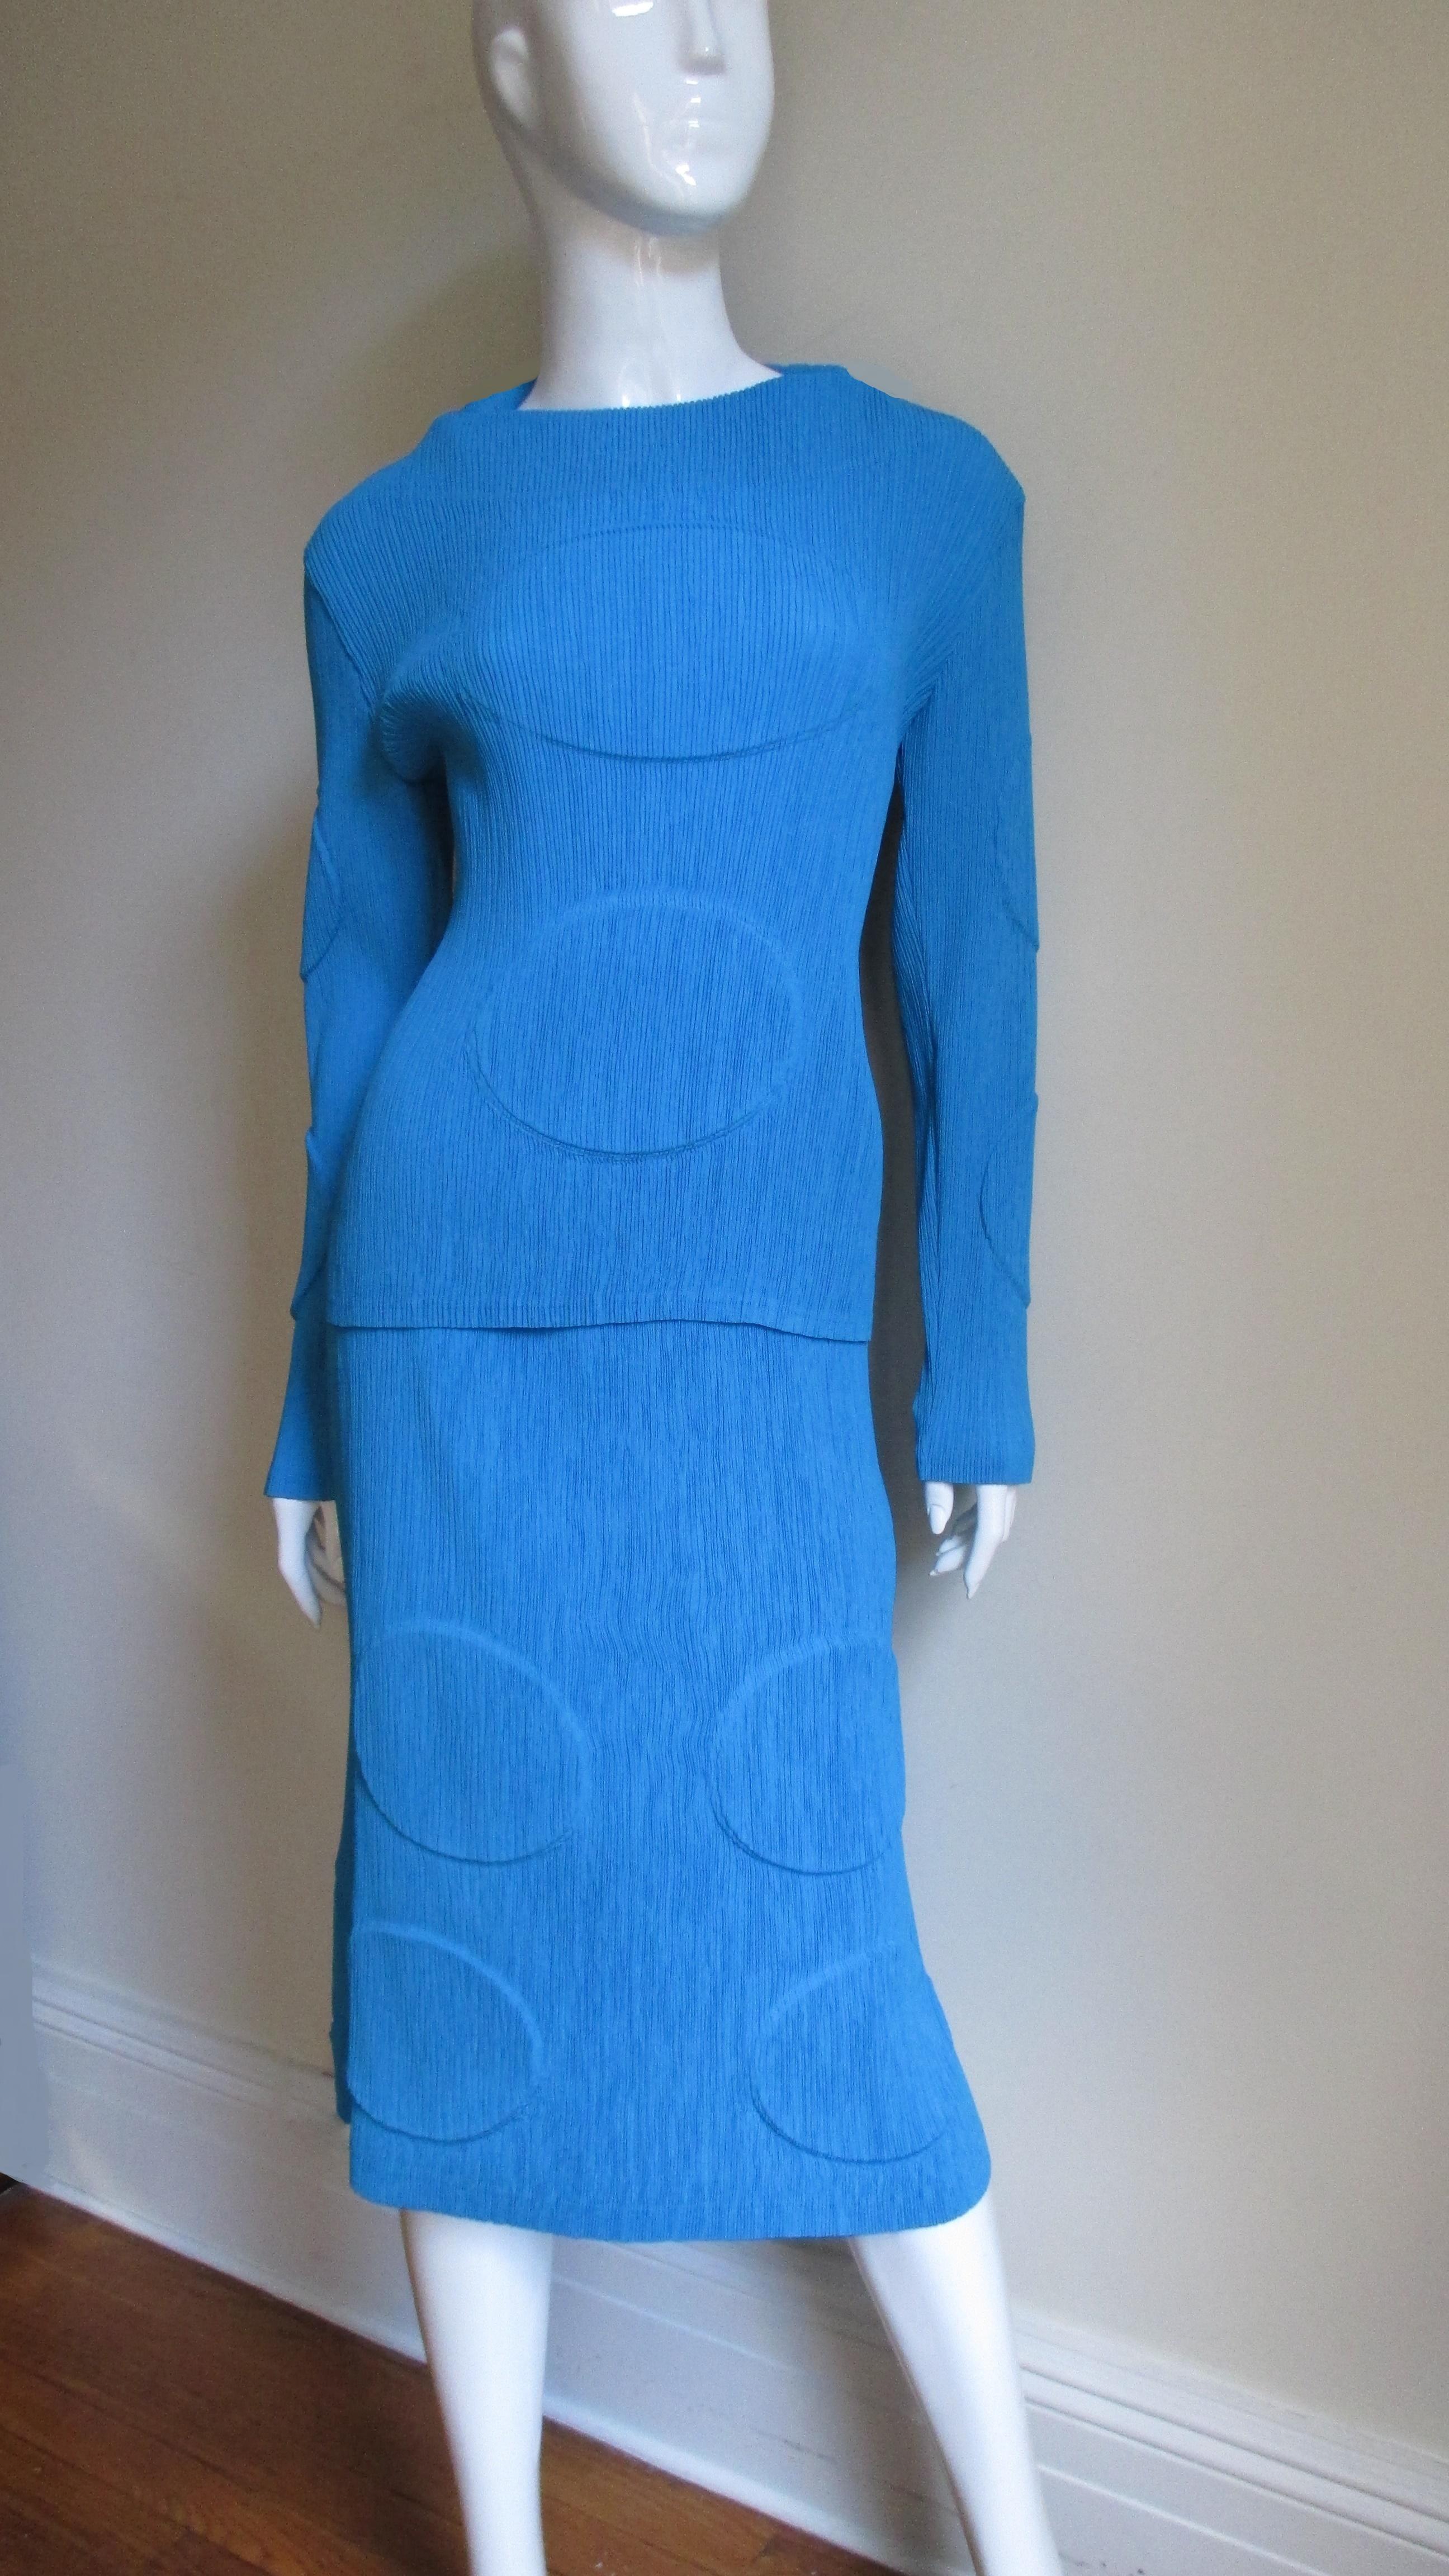 A fabulous 2 piece set from Issey Miyake in beautiful blue micro pleating the designer is famous for.  The long sleeve top has a bateau neckline and the skirt is straight with a stretch waist.  Both pieces have large orb imprints- convex on the